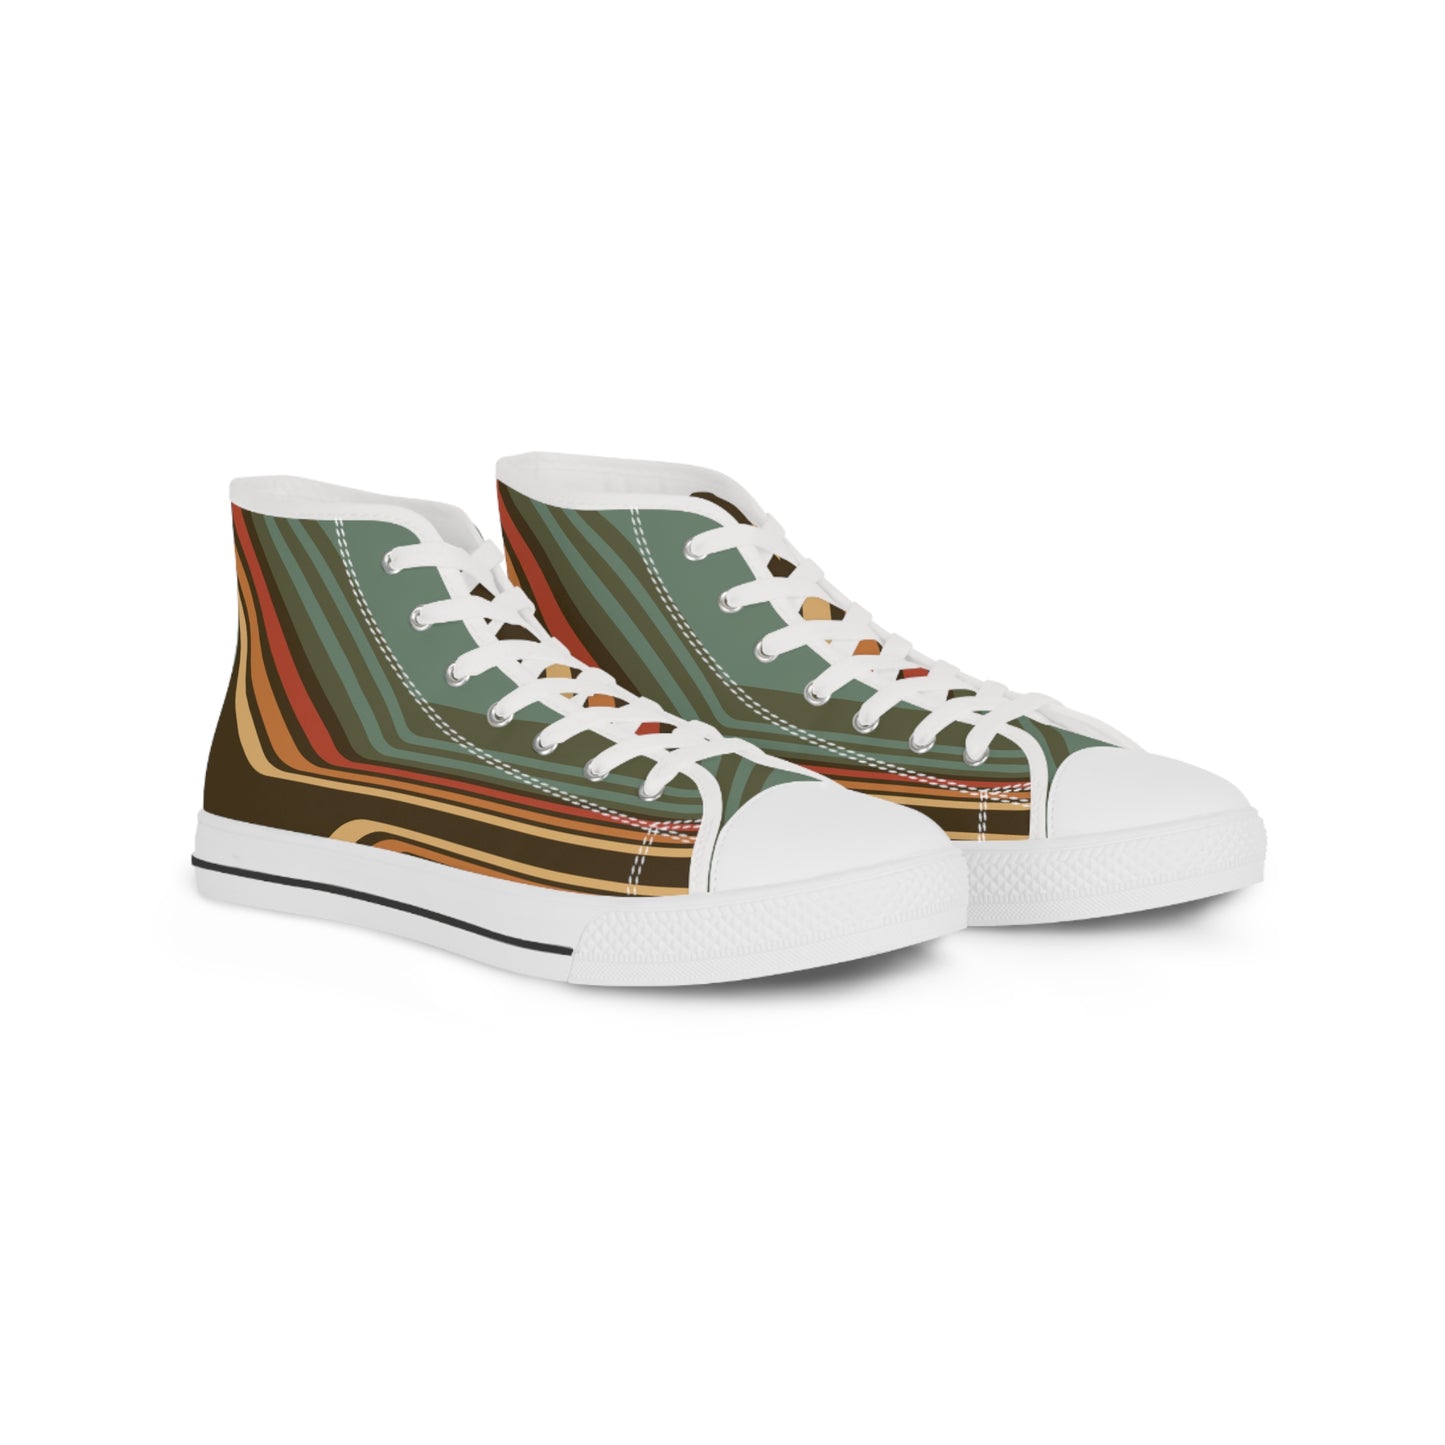 Limited Edition High Top Sneakers - Wawa 1965